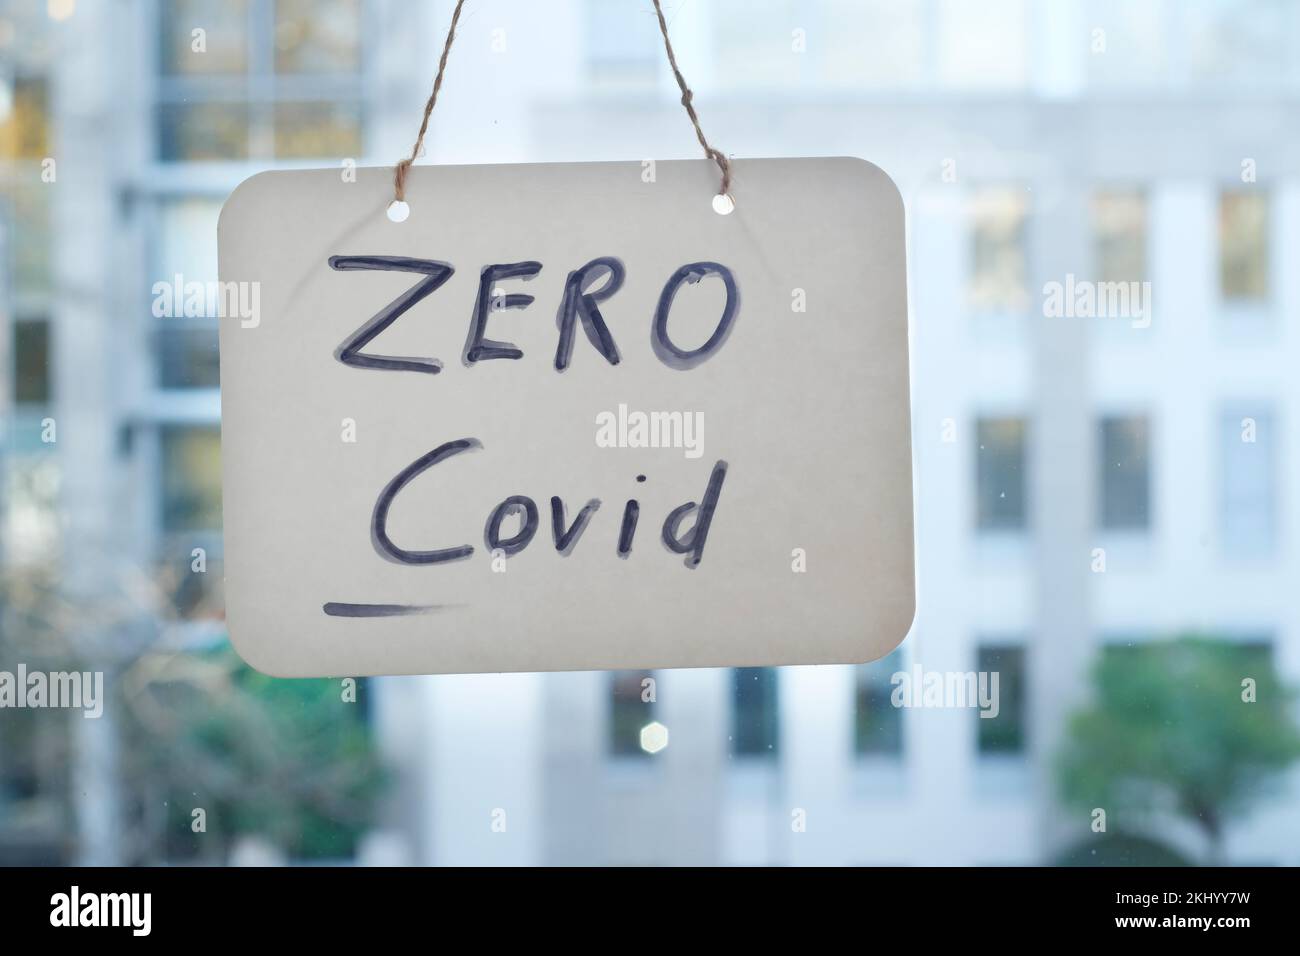 Zero covid sign on window, office buildings in the back. Stock Photo